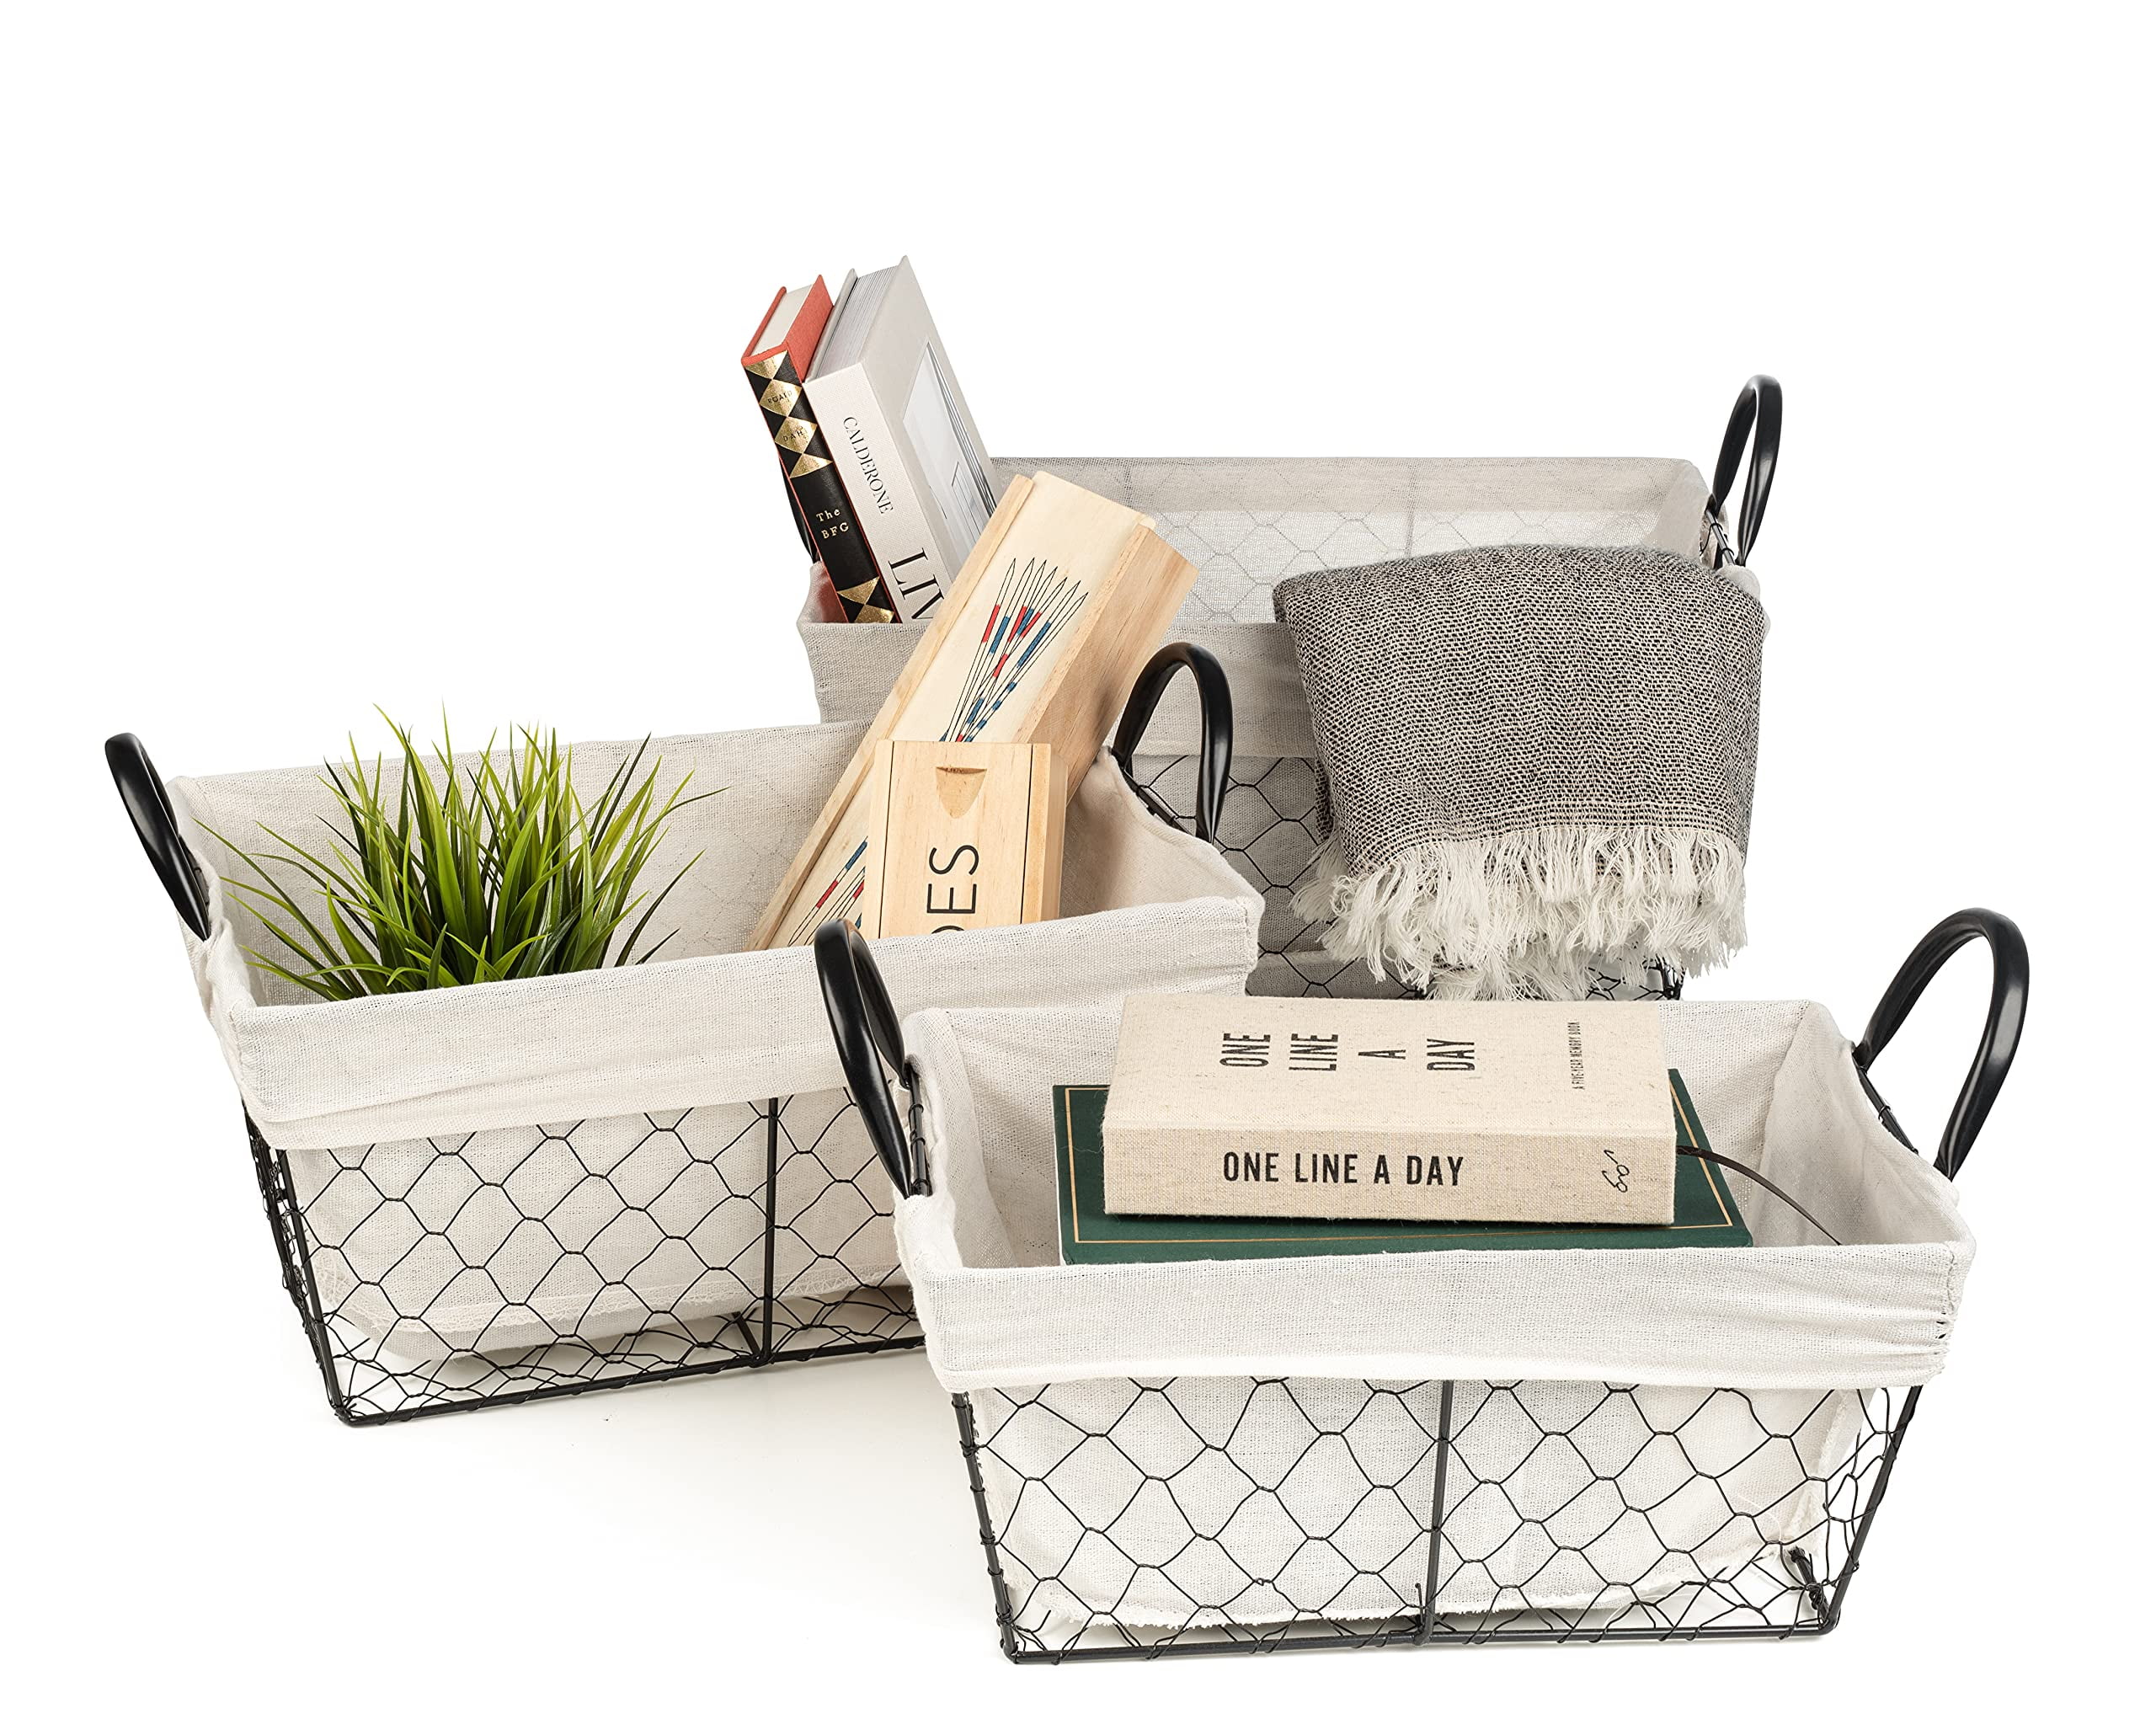 Sorbus Set of 3 Storage Baskets for Organizing with Lid, Mesh Hand-Woven  Basket, Linen Closet Organizers and Storage, Organizer Storage Baskets for